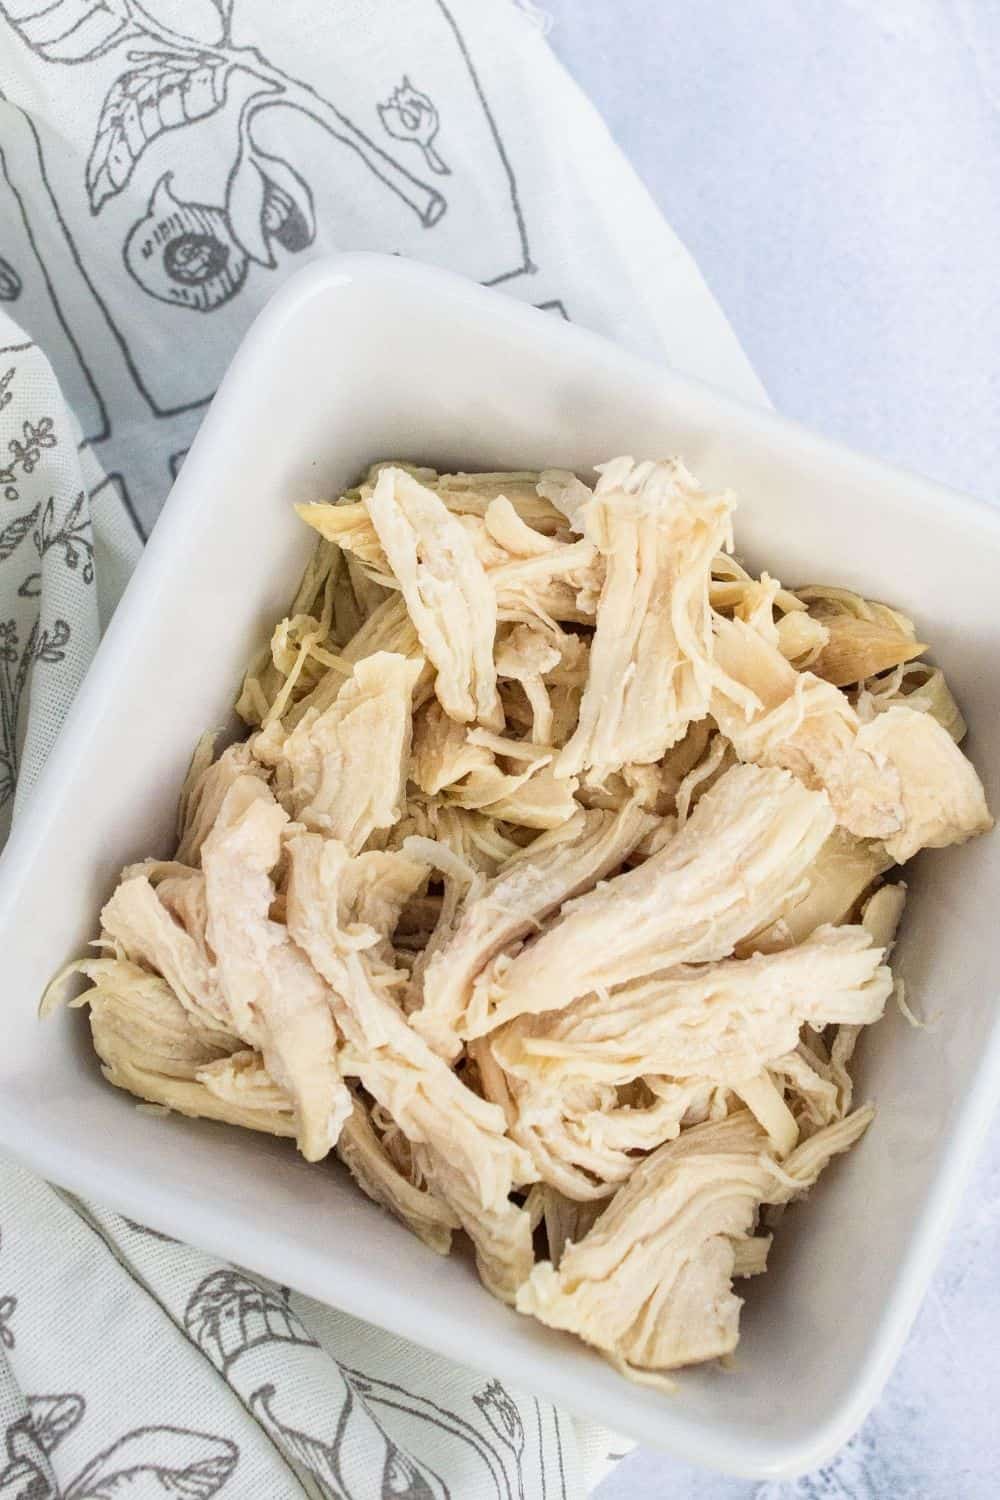 shredded chicken in a white square bowl, which was cooked from frozen in the pressure cooker